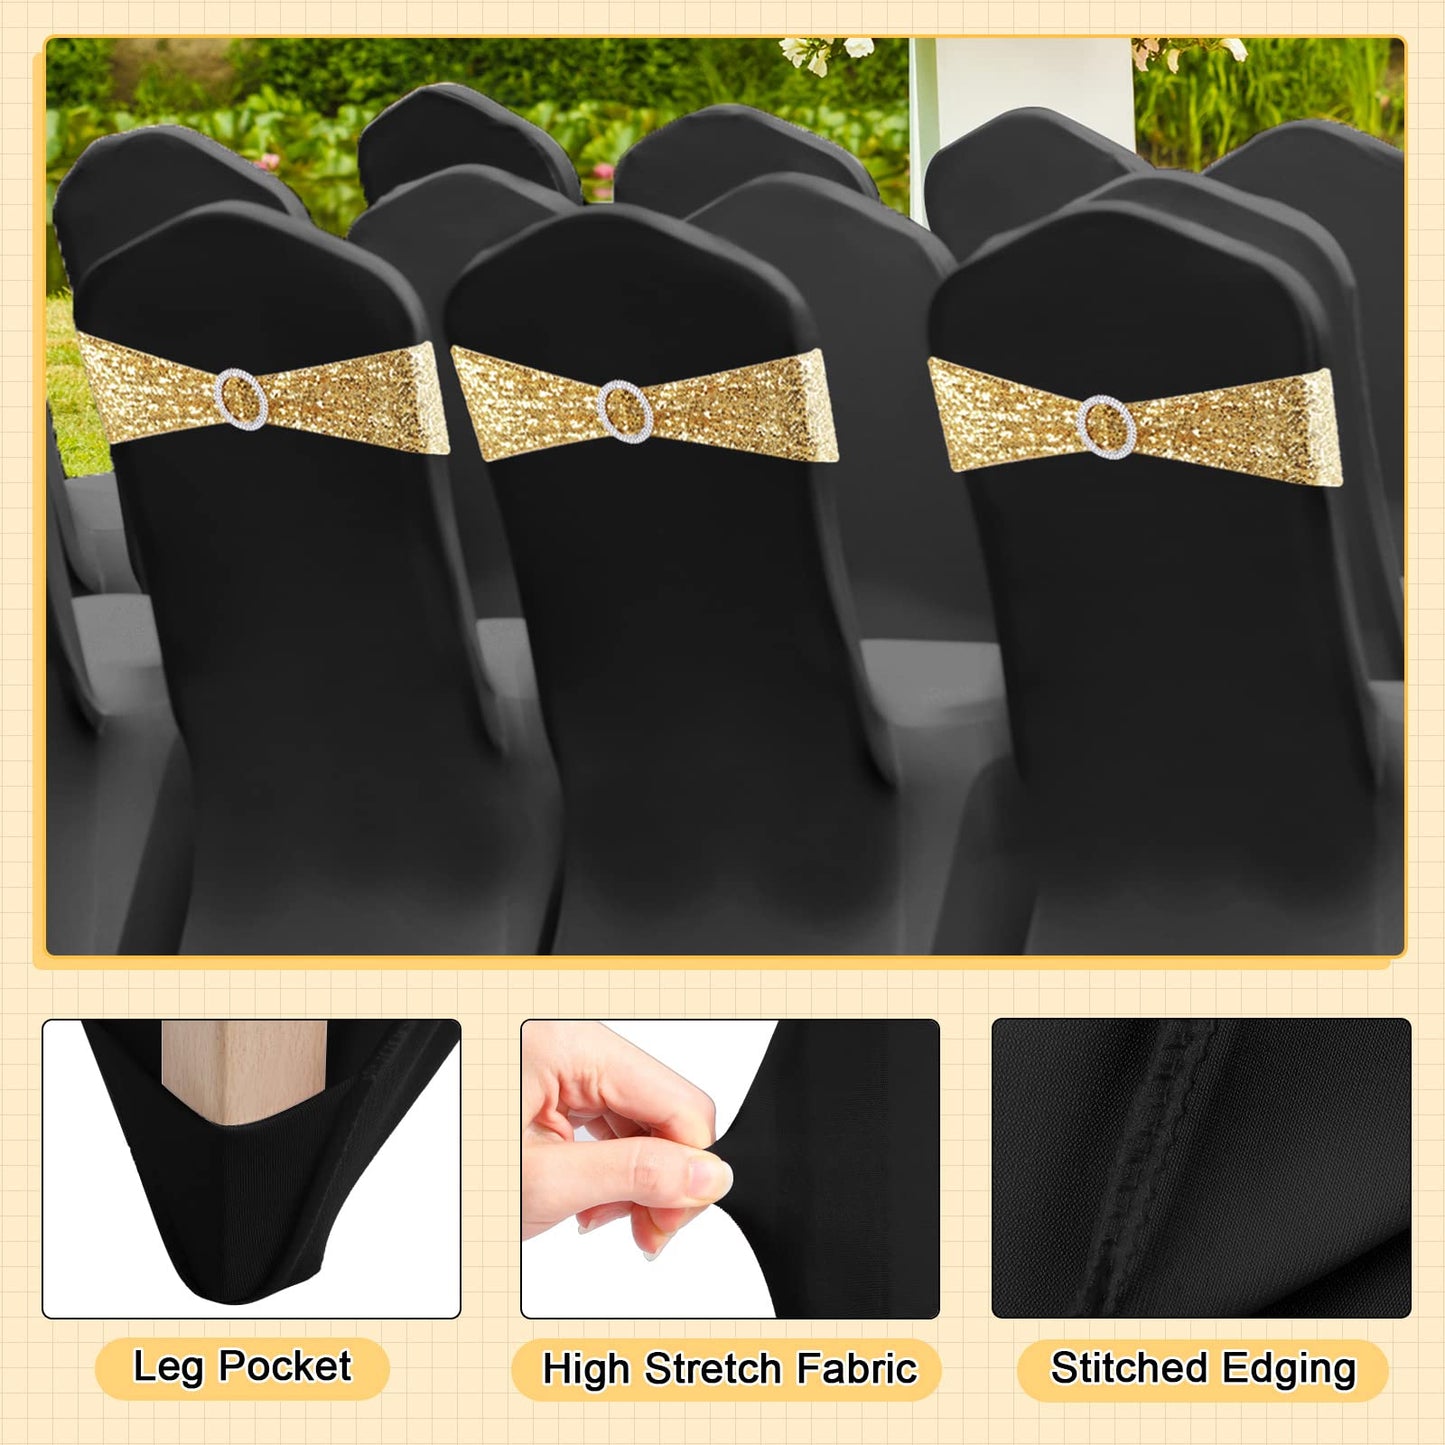 High stretch fabric black chair covers